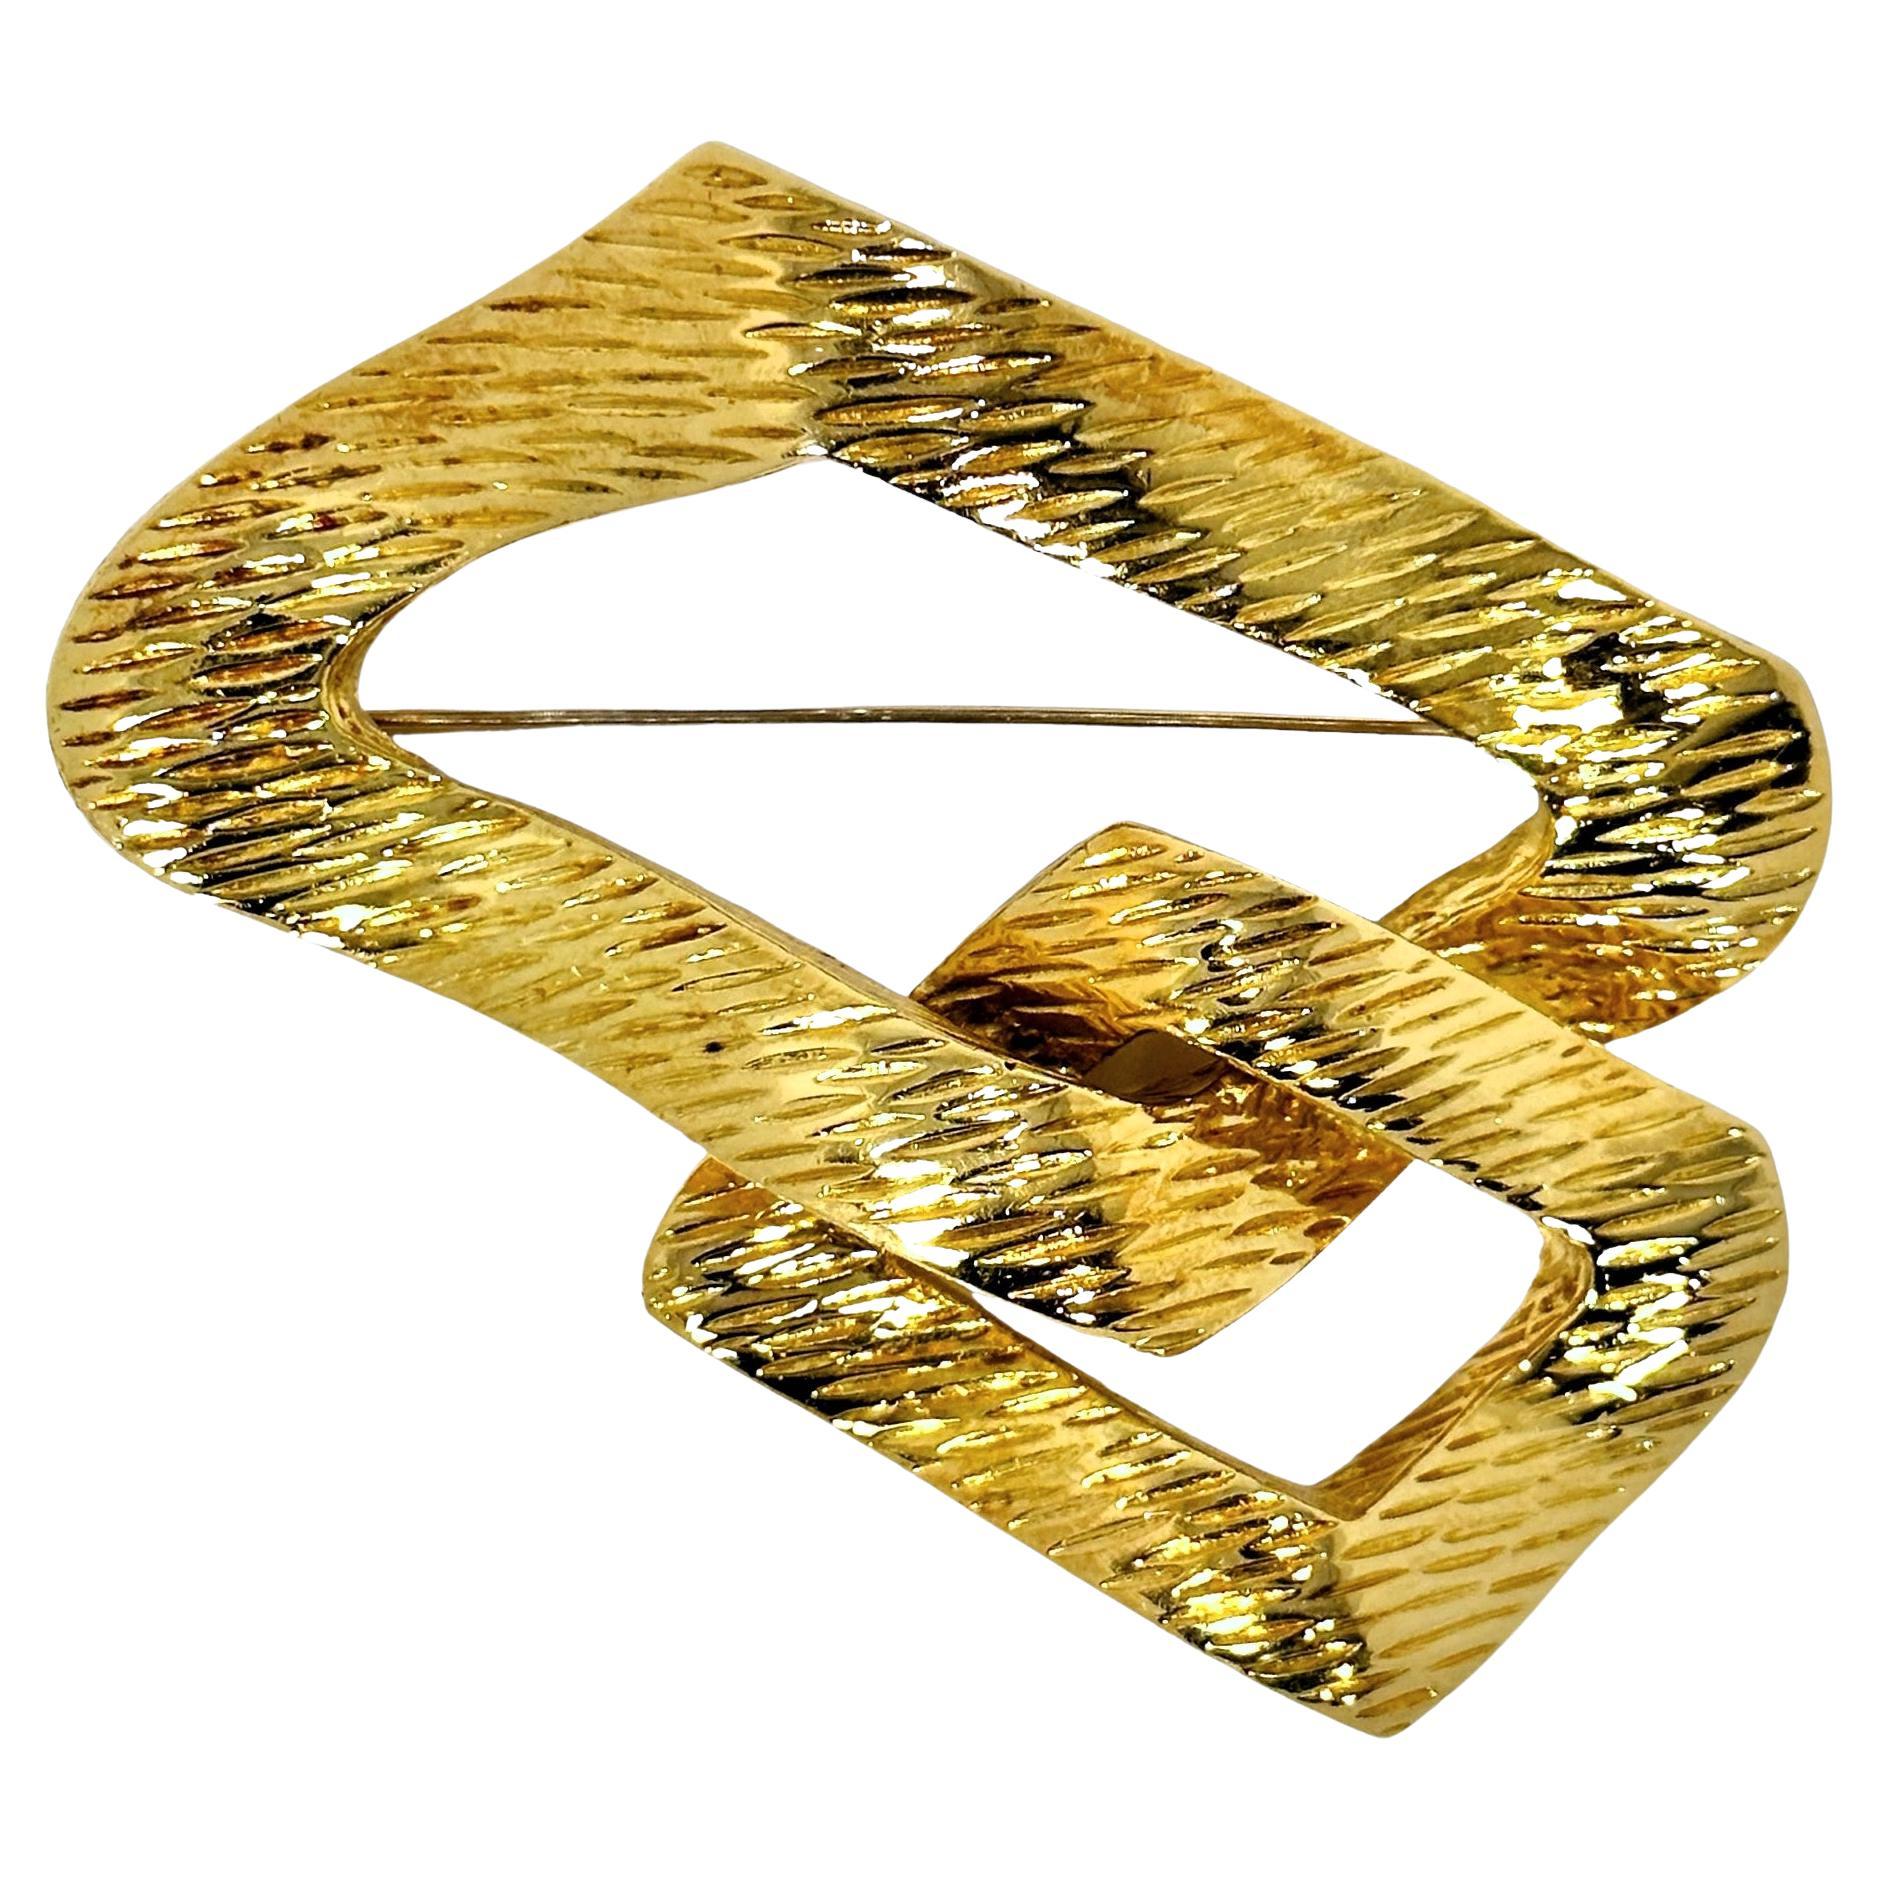 This truly colossal 18k yellow gold Mid-20th Century French Wander designer pendant-brooch is certain to evoke a visceral response in any who see it. At a full 3 1/2 inches in length by 2 3/4 inches in width, it is destined to become a cherished